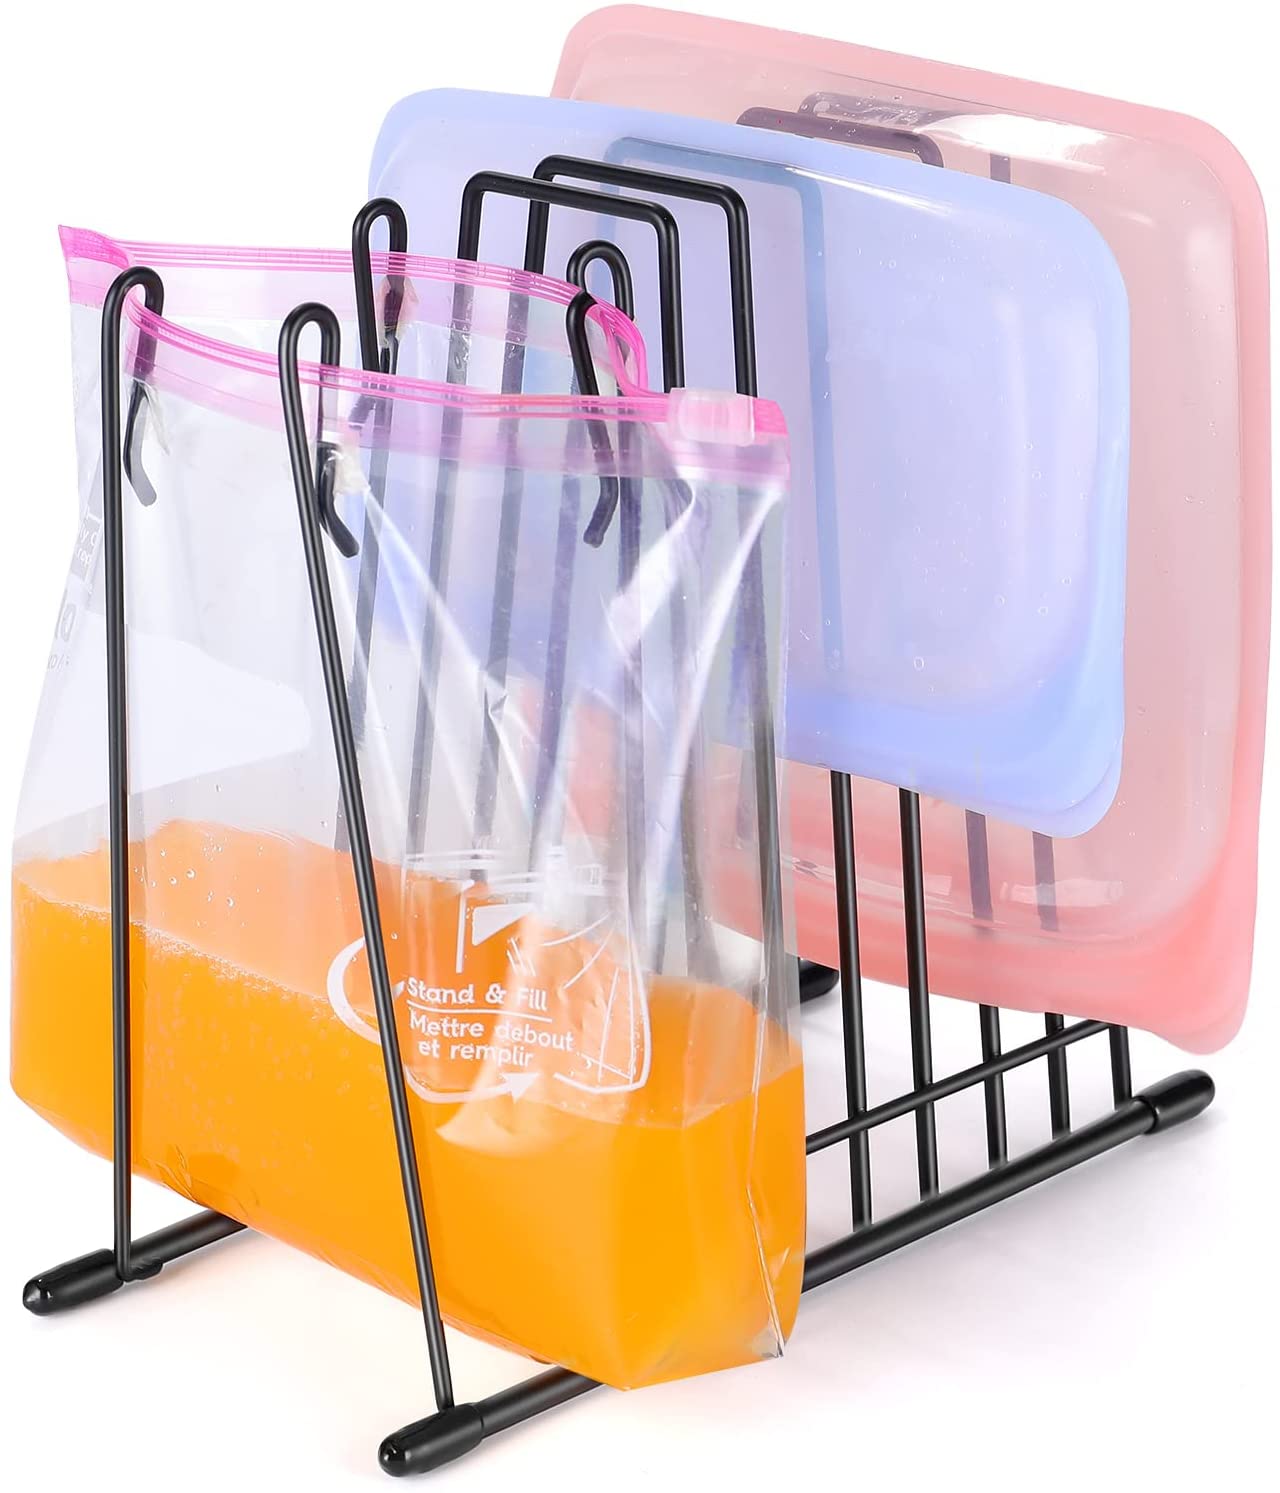 IDEATECH Reusable Storage Bags Rack, Drying Rack for Storage Bags,  Stainless for